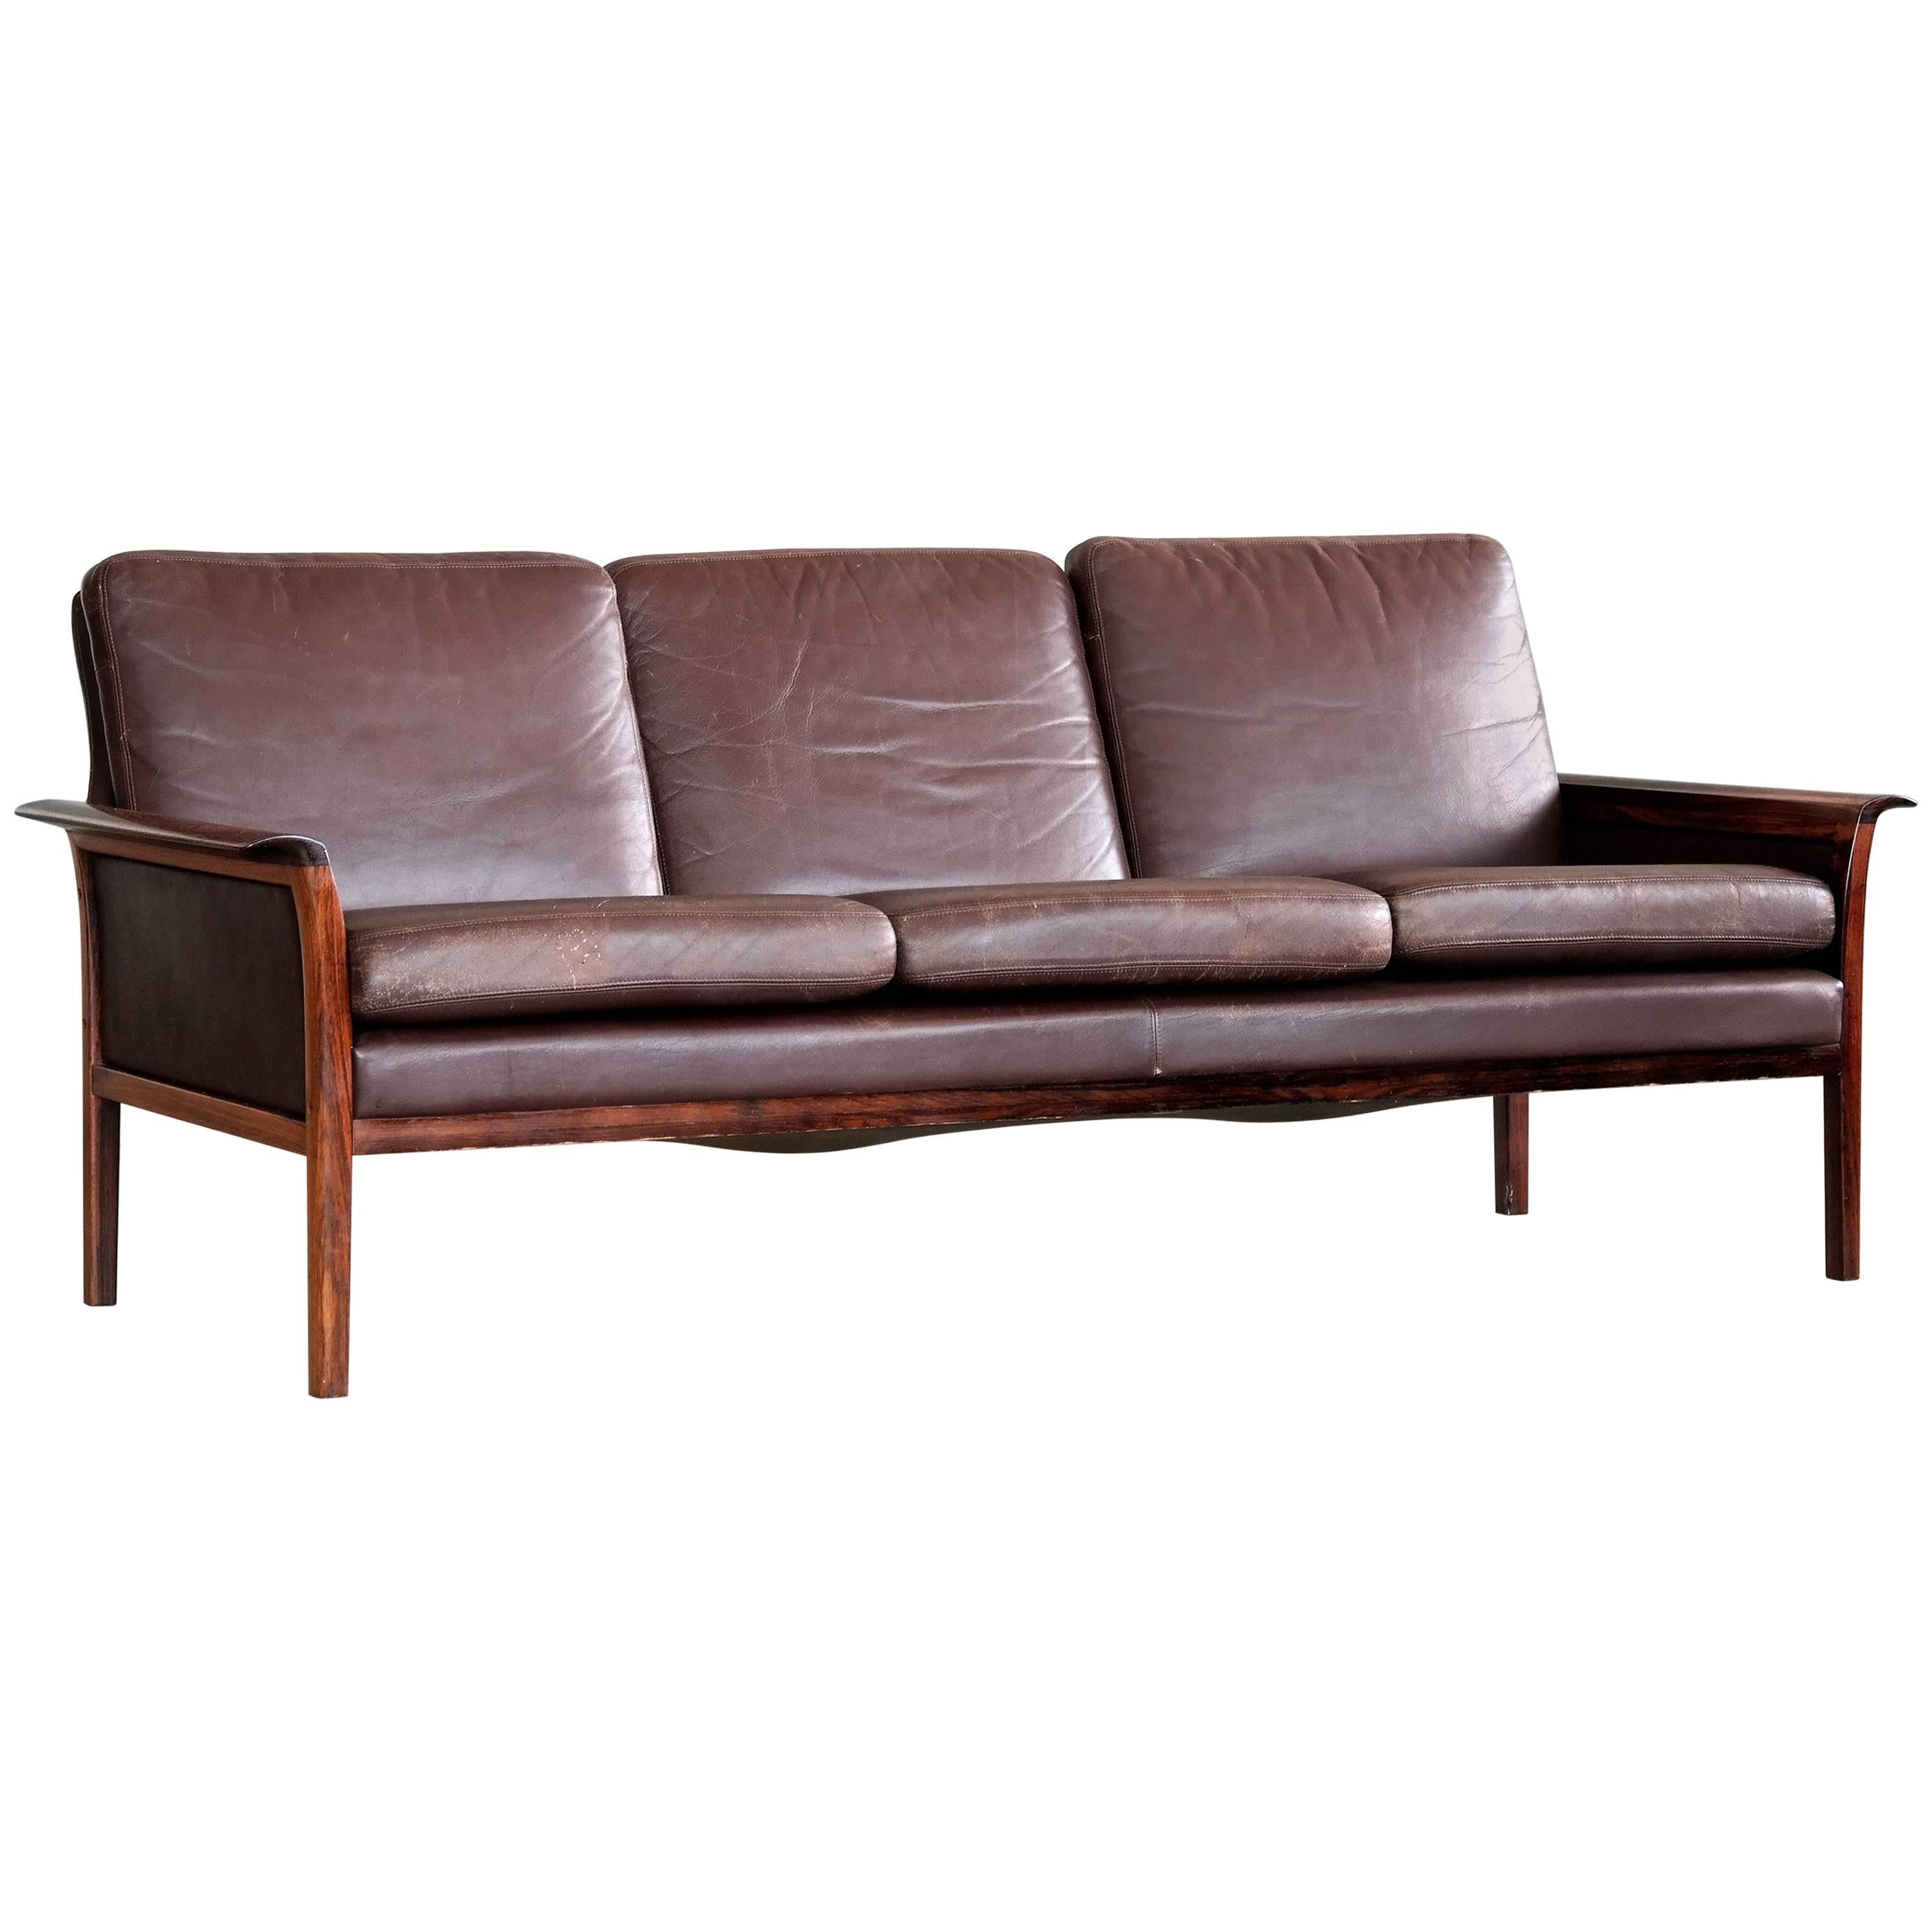 Three-Seat Sofa in Cordovan Leather and Rosewood by Hans Olsen for Vatne, Norway